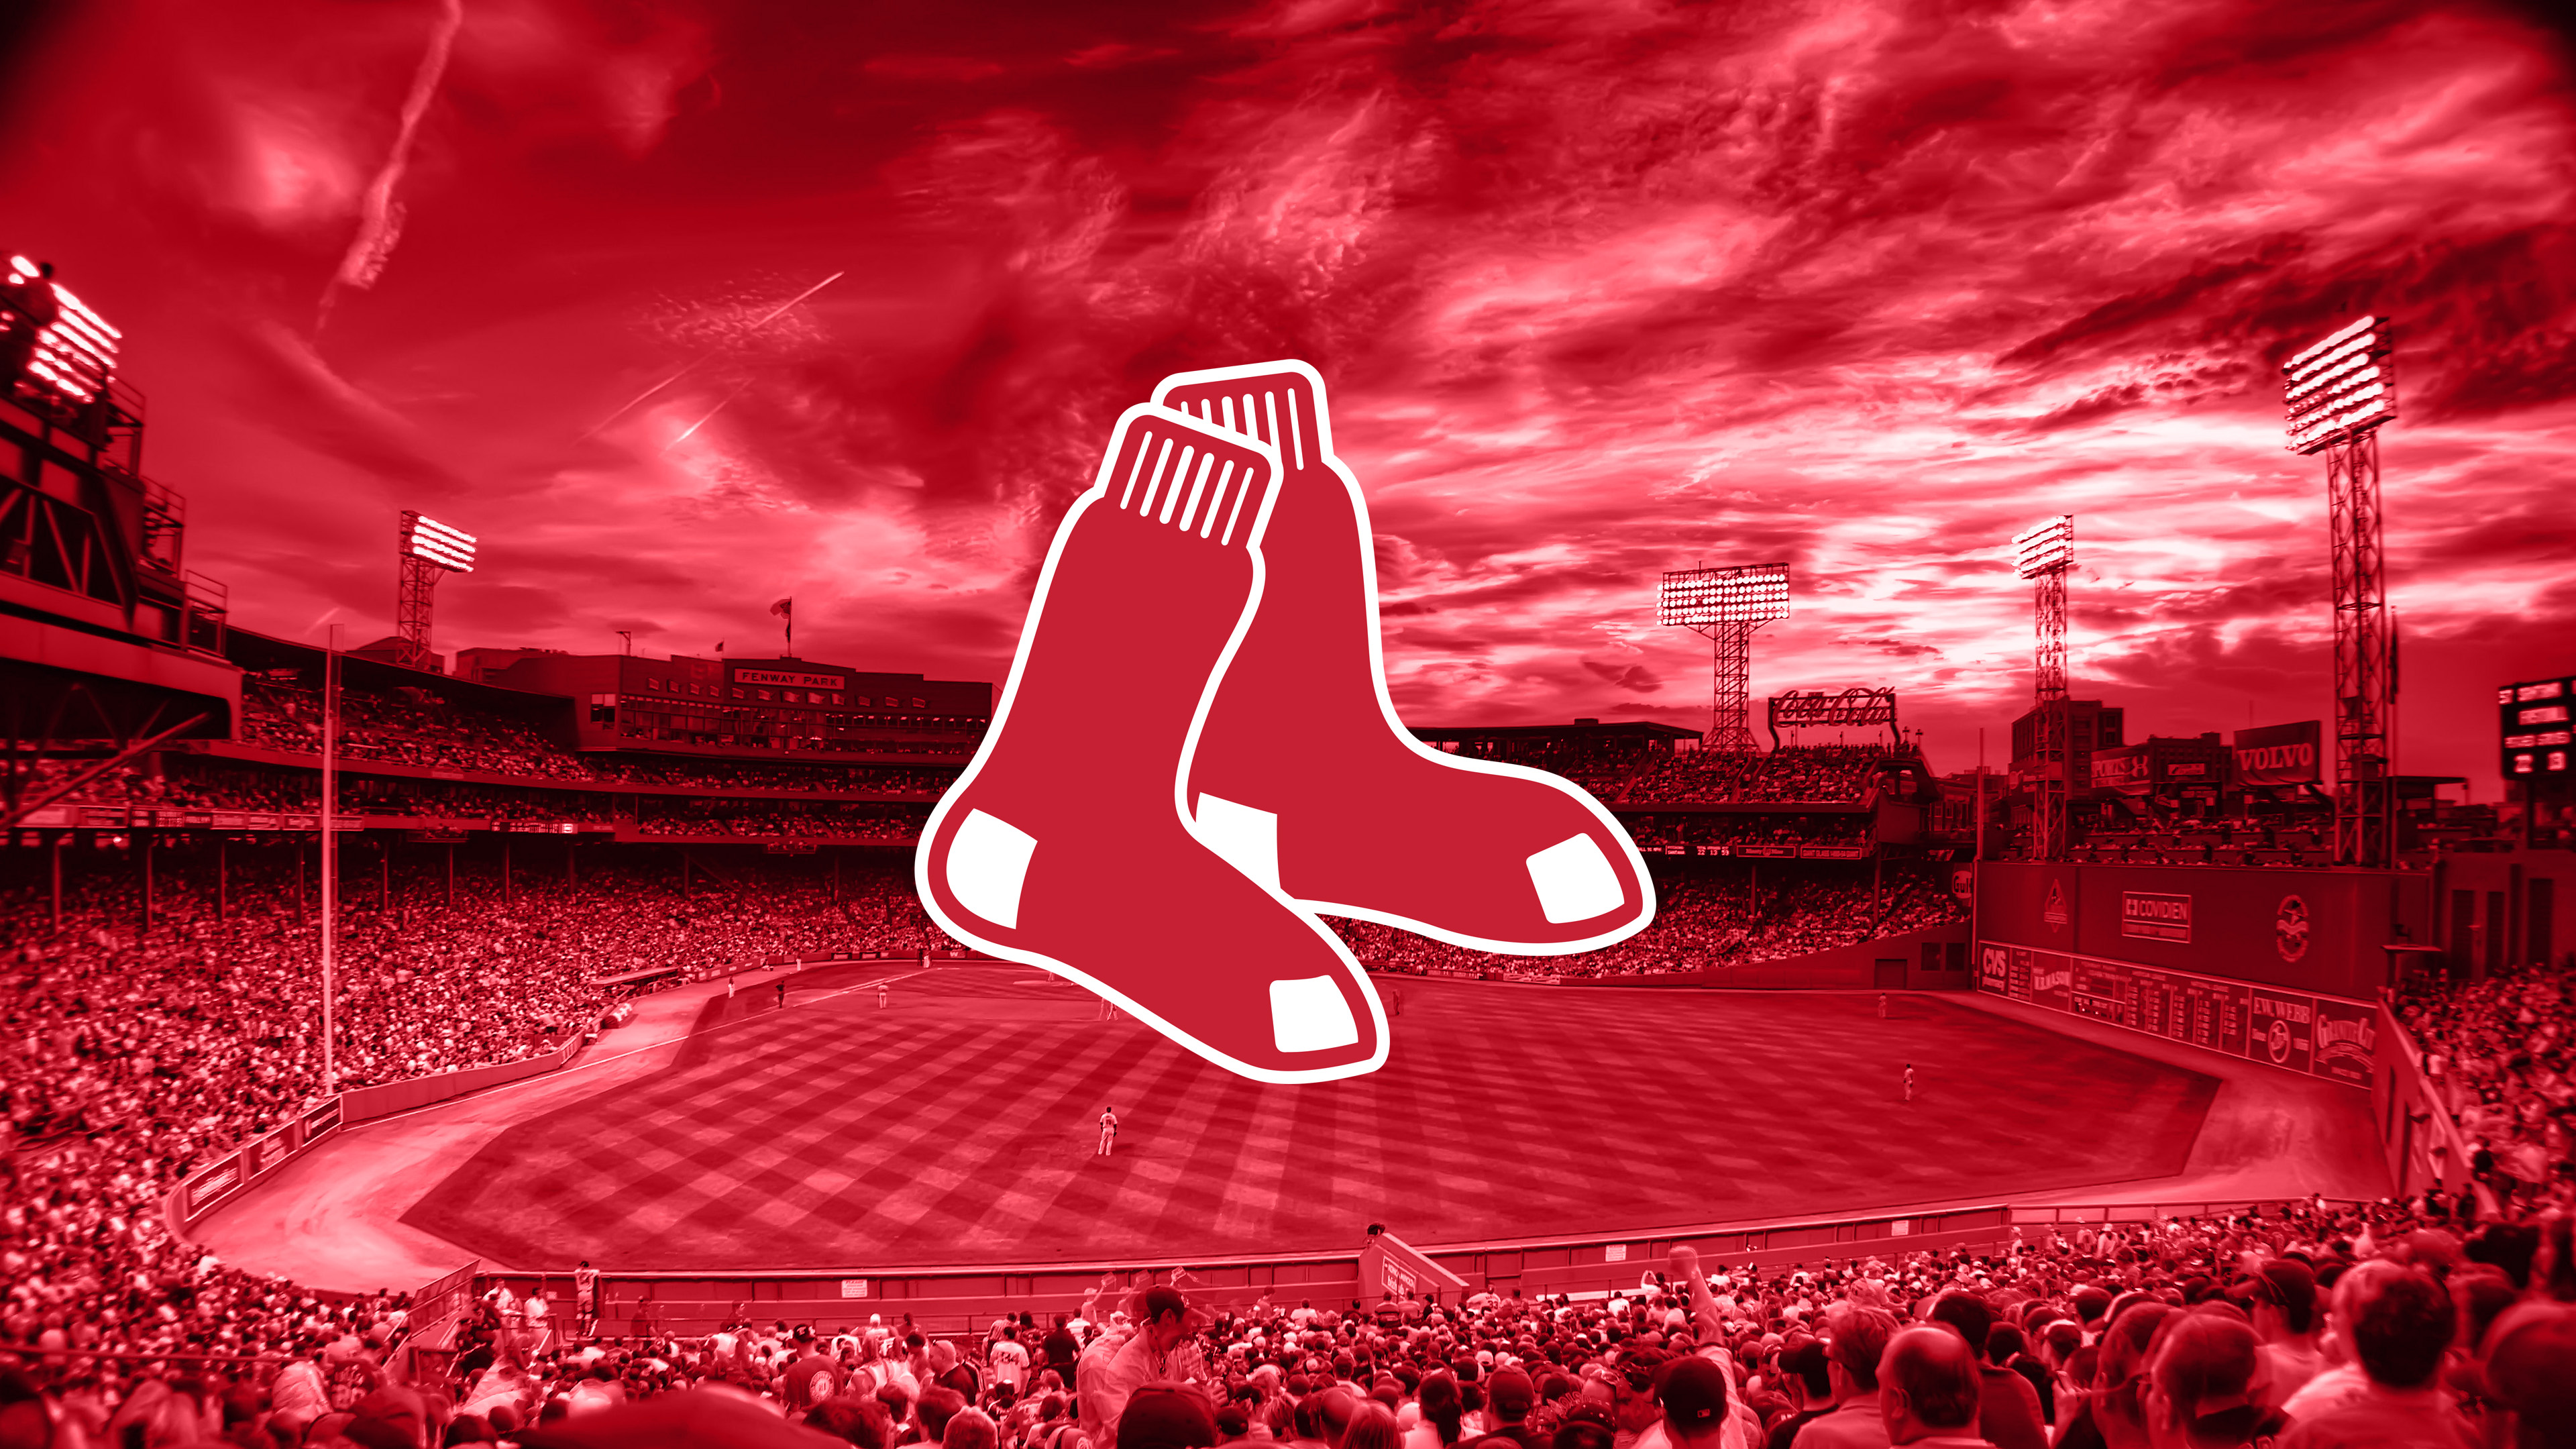 Free Download Mlb Boston Red Sox 15 Logo 4k Wallpaper 3840x2160 For Your Desktop Mobile Tablet Explore 76 Red Sox Desktop Wallpaper Red Sox Desktop Wallpaper 13